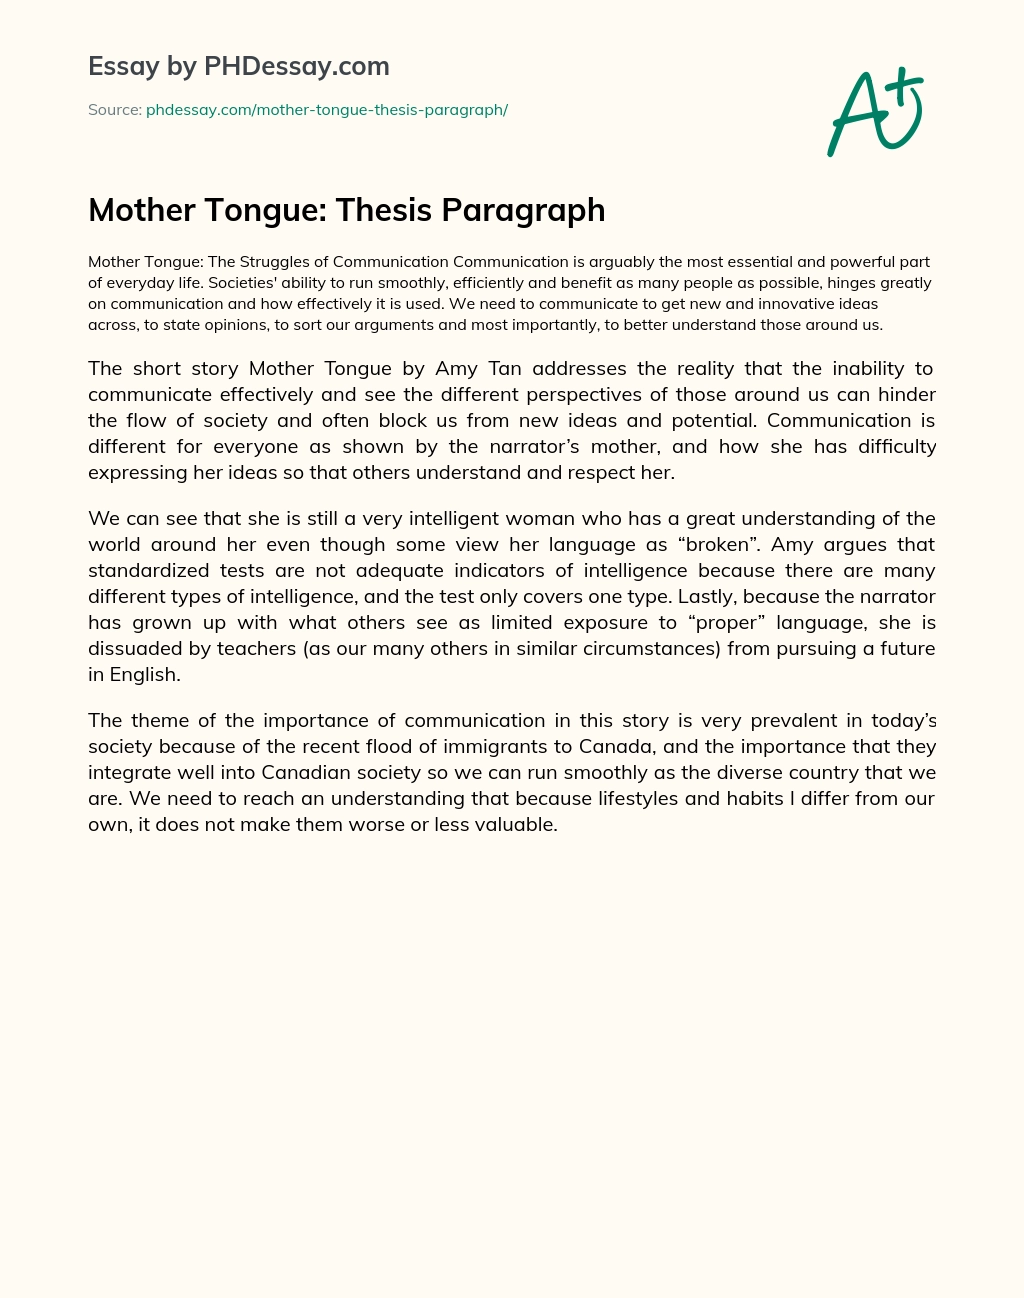 Mother Tongue: Thesis Paragraph essay